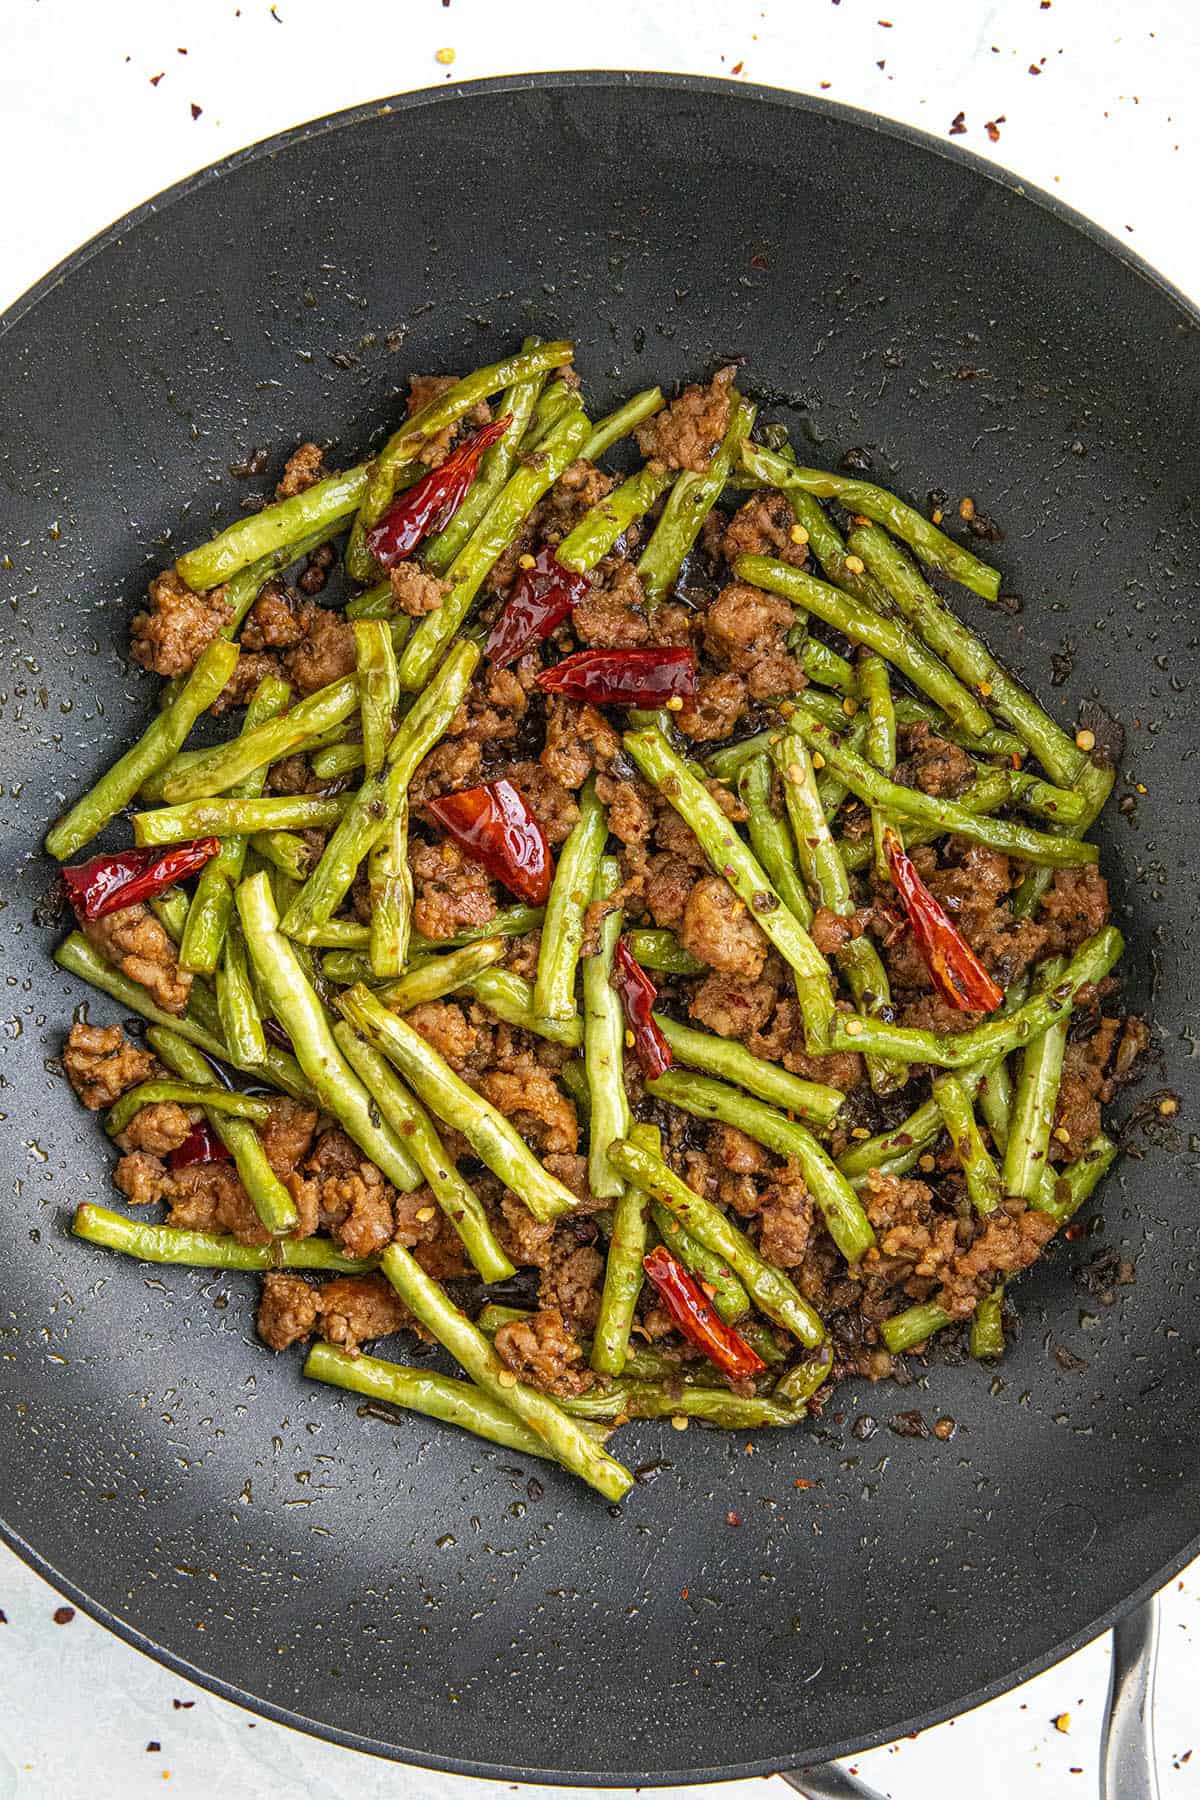 Sichuan Dry Fried Green Beans Recipe in a pan, ready to serve